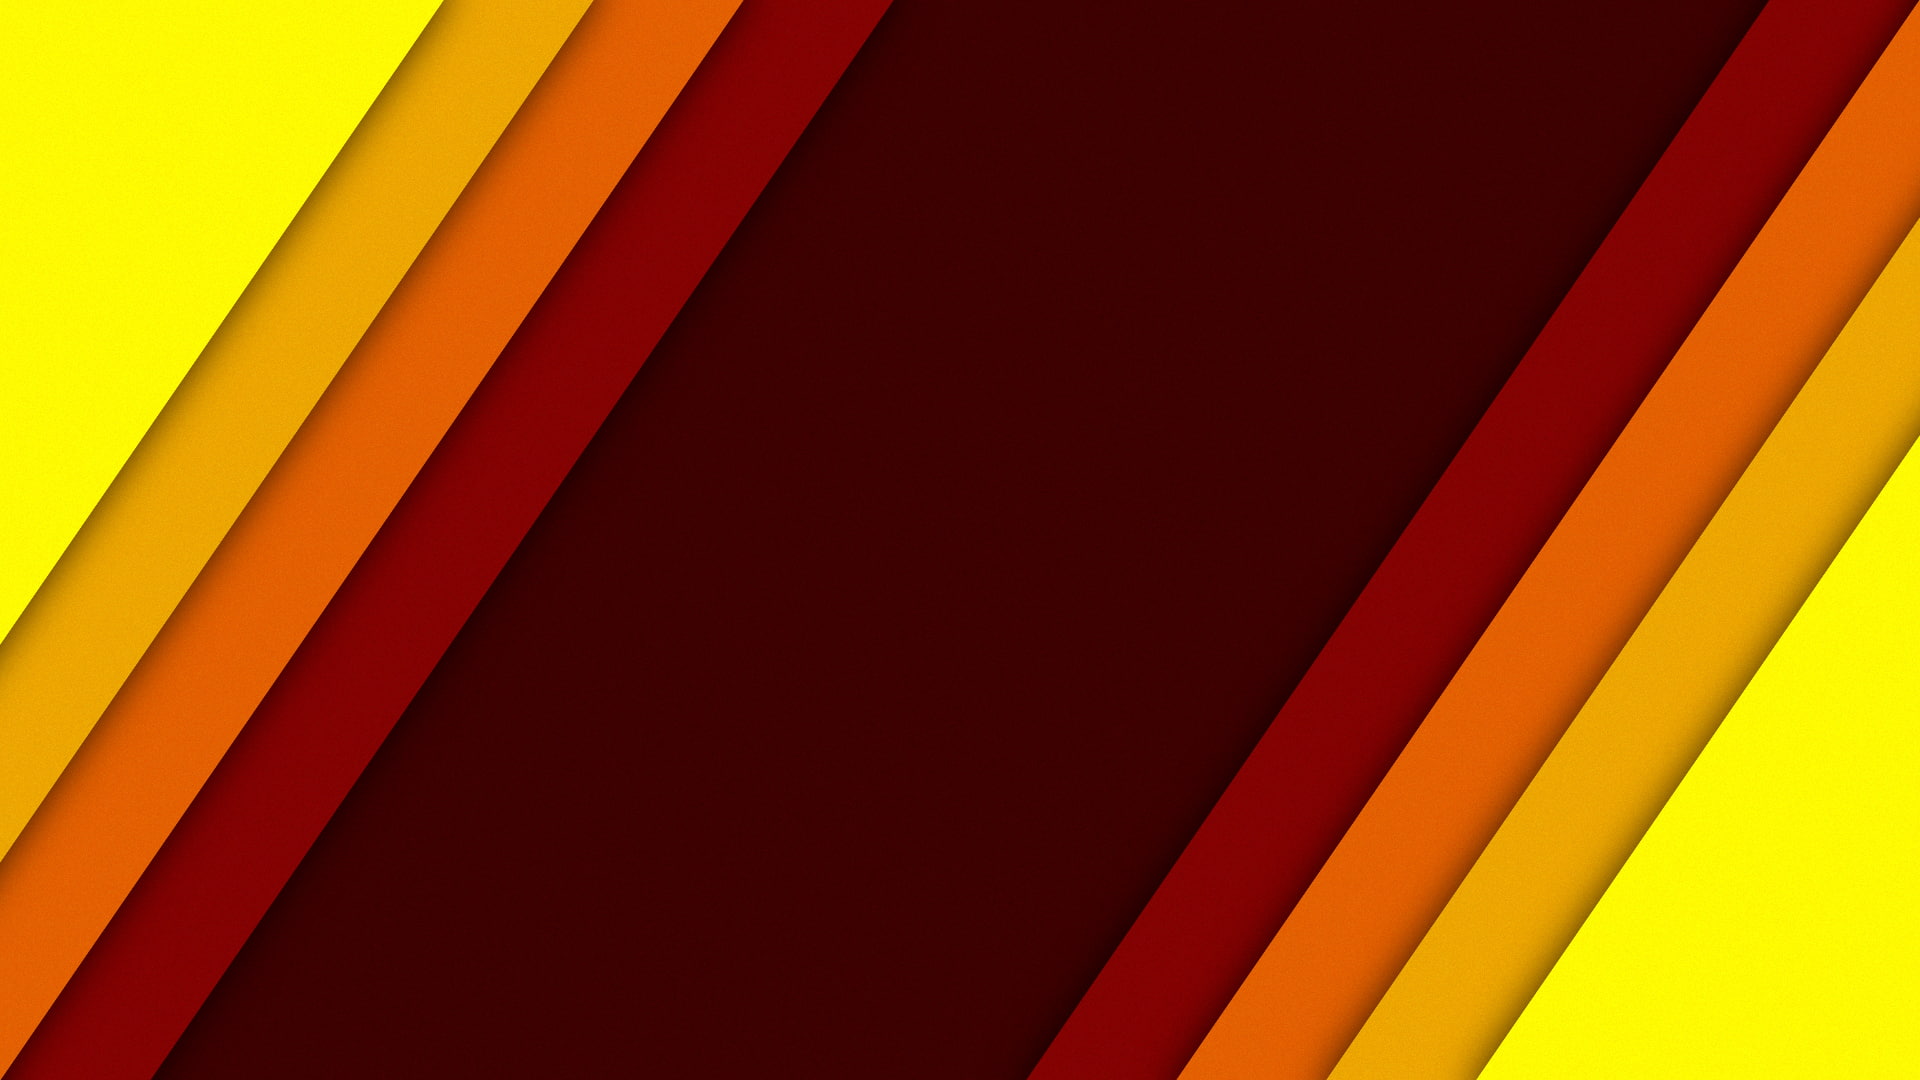 material style, static, minimalism, lines, orange, brown, yellow